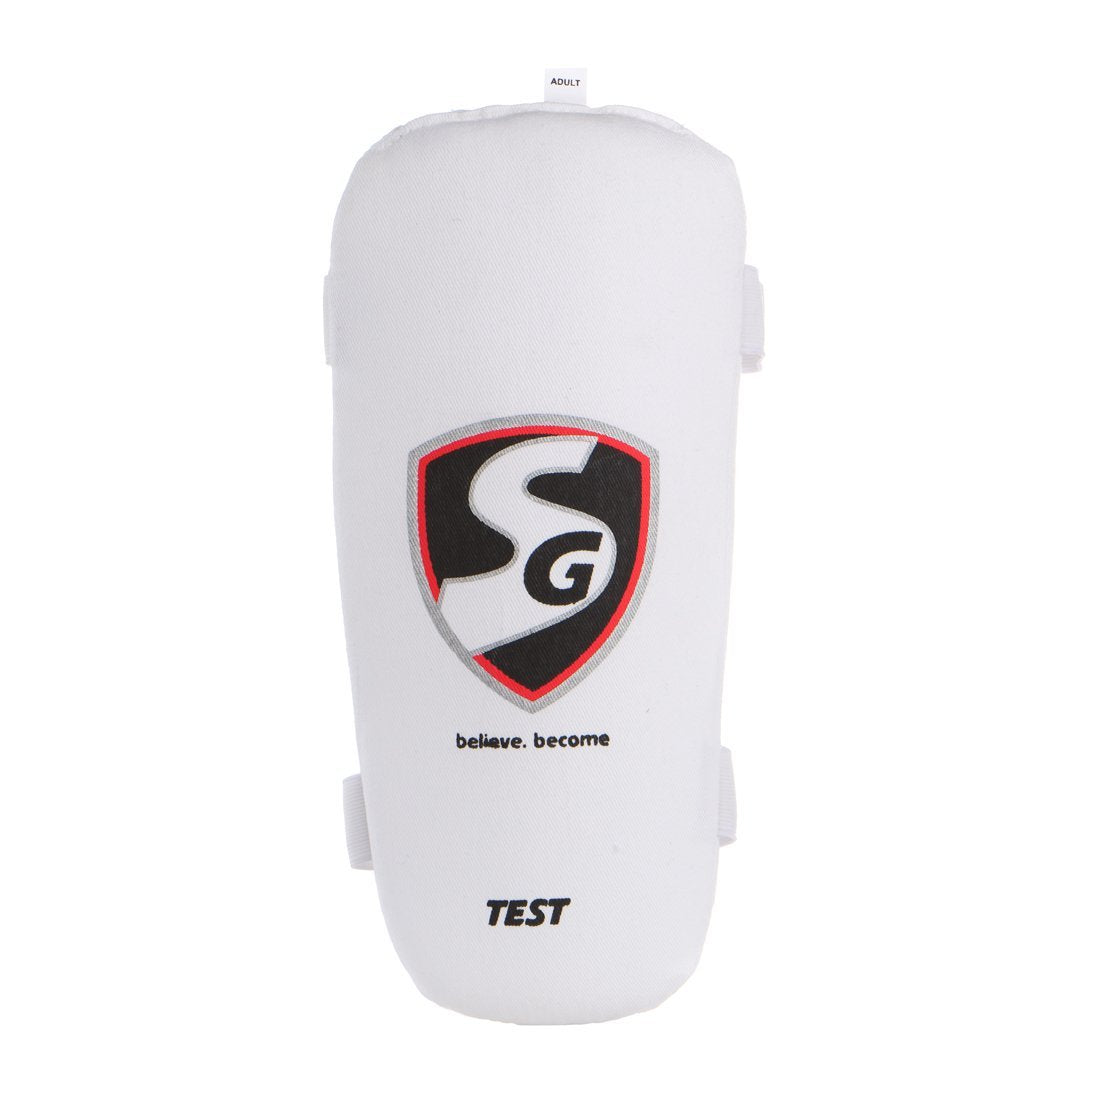 SG Test Cricket Adult Elbow Guard